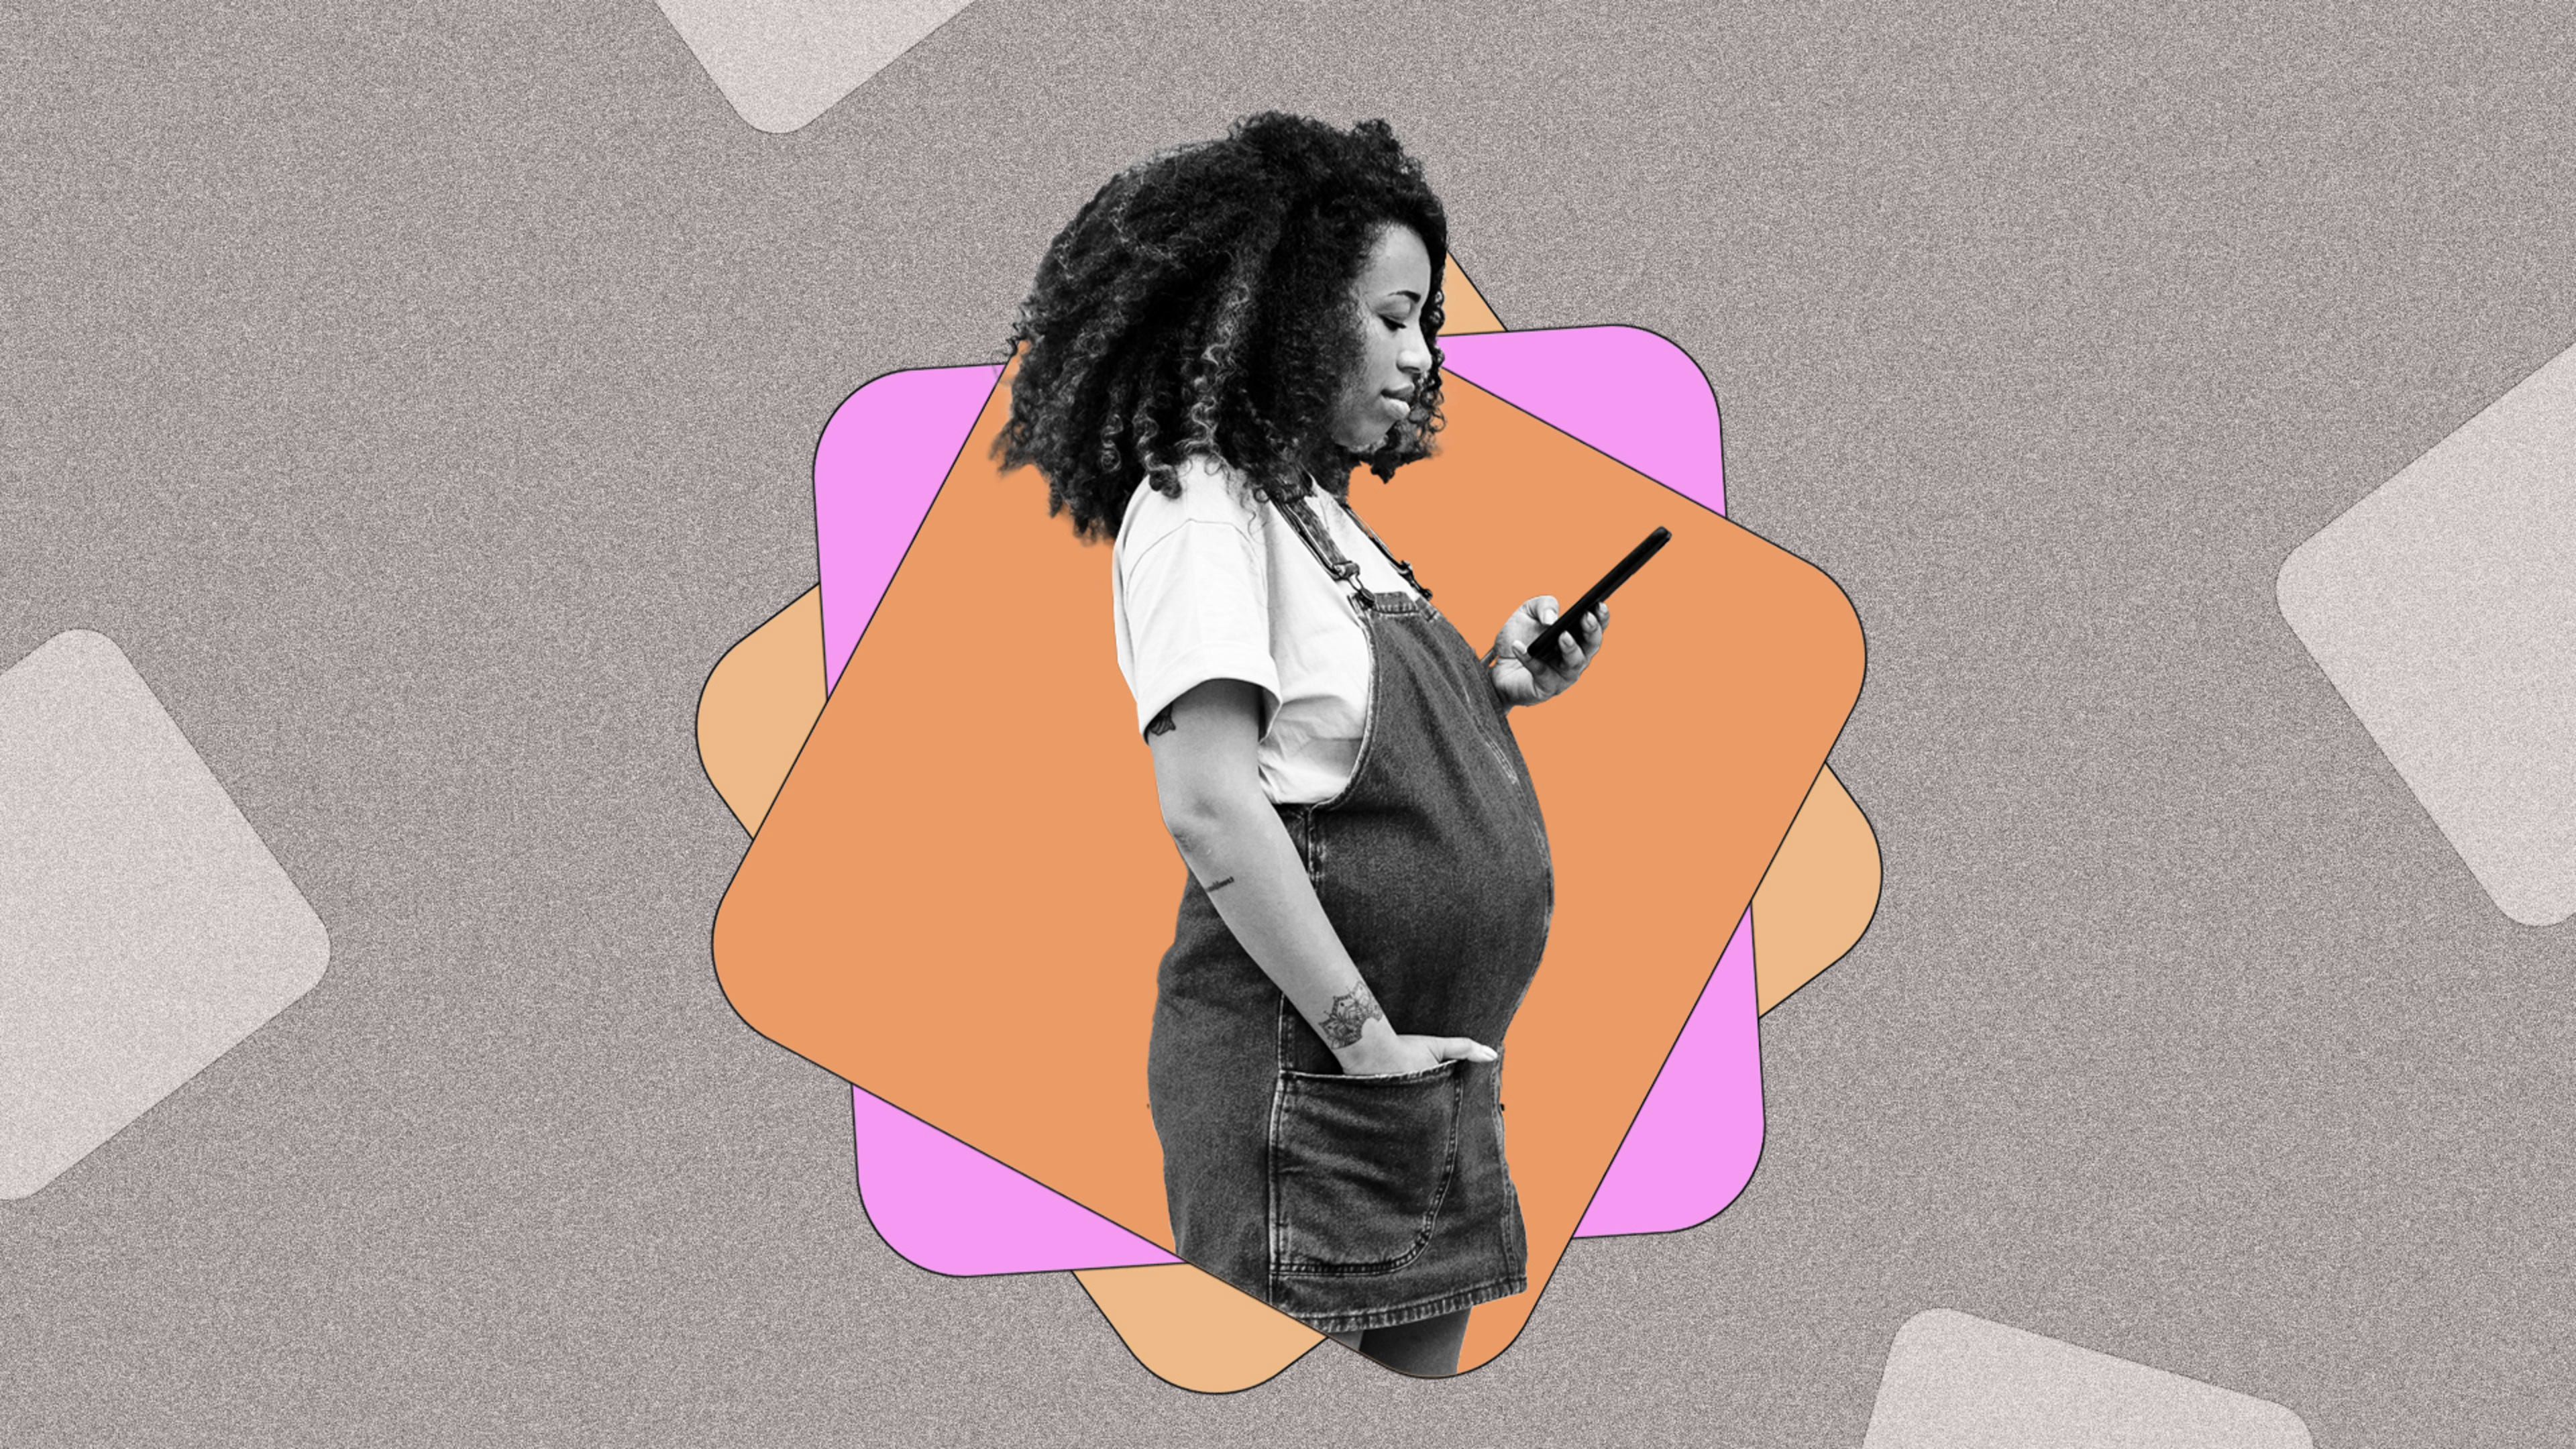 POV: For communities of color, pregnancy apps need a human touch